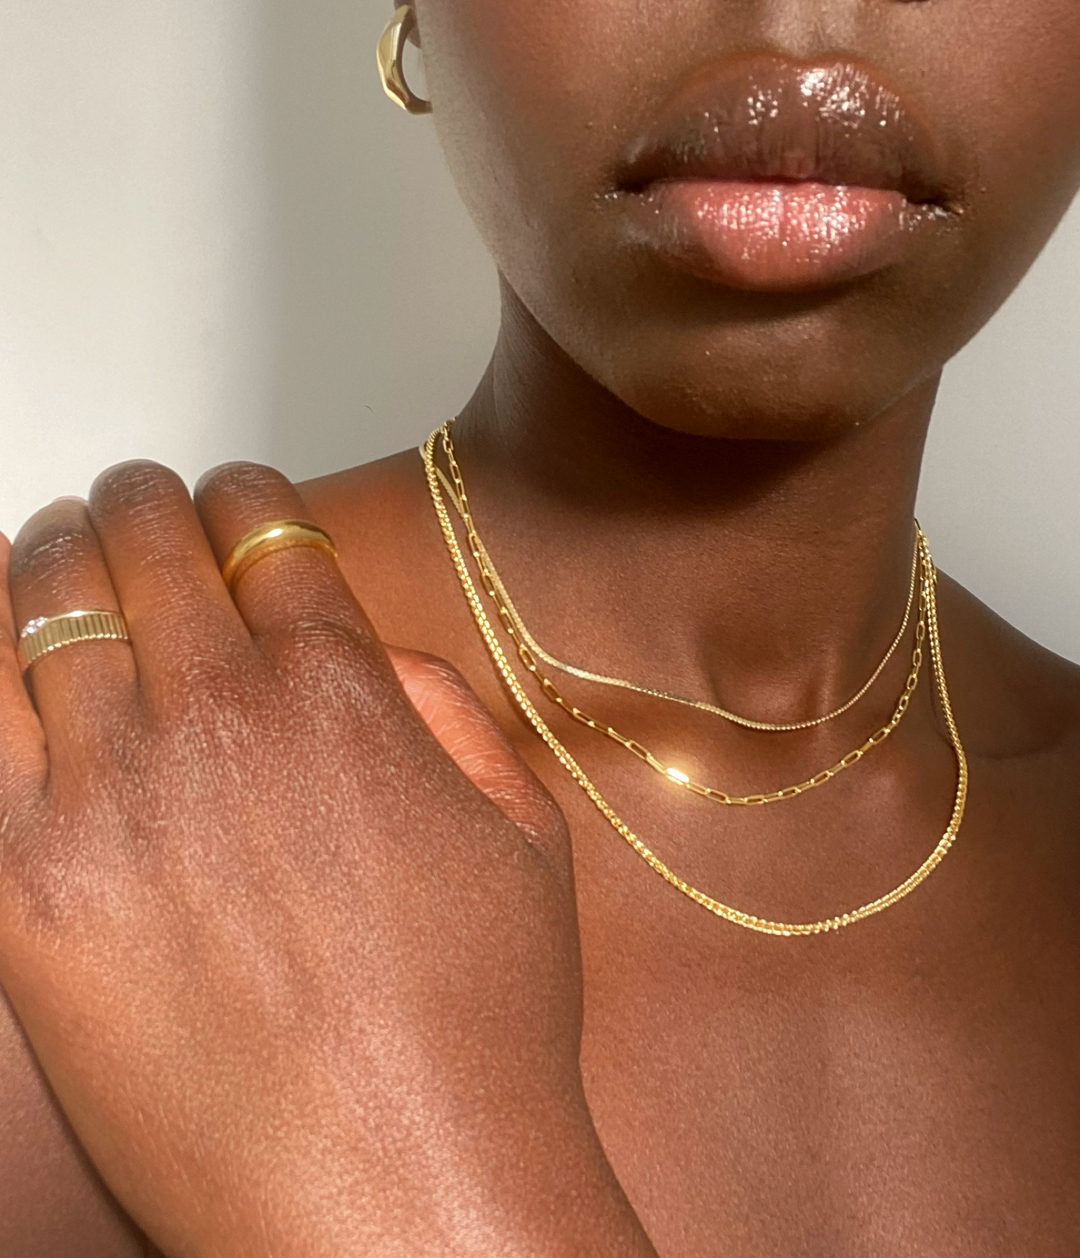 a woman wearing gold chains and rings, only her hand and shoulders are visible